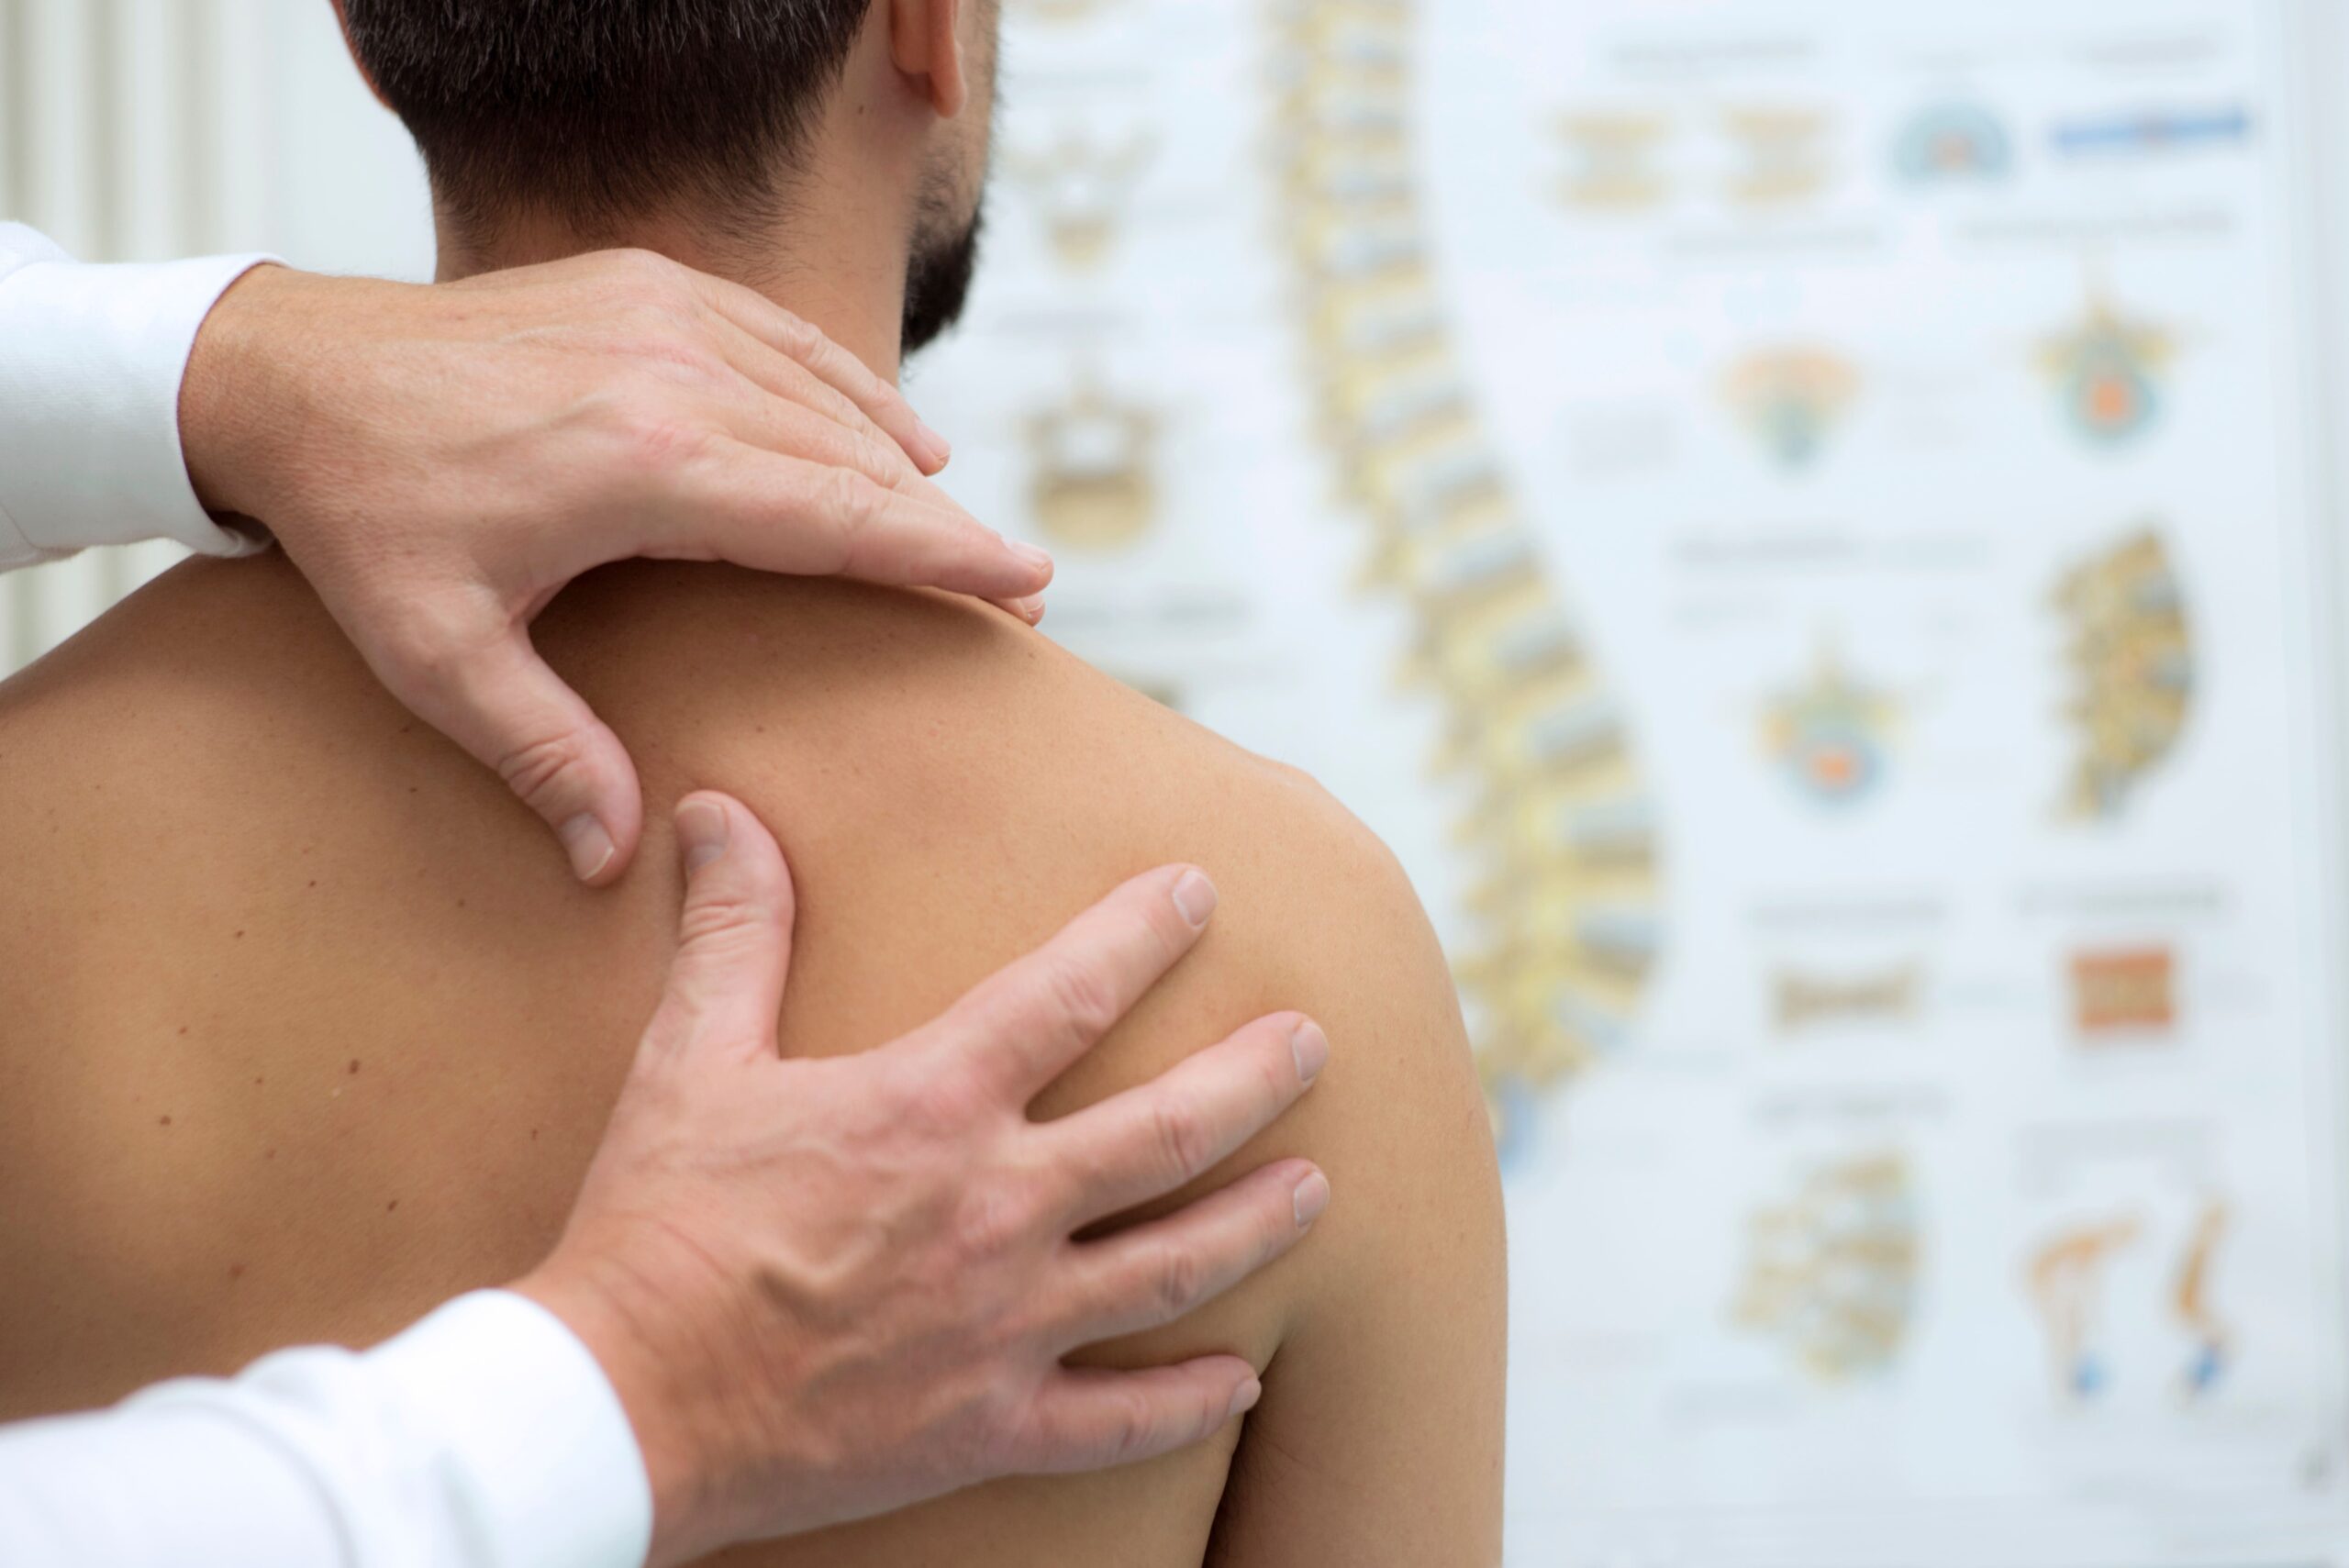 How to fix poor posture with chiropractic care